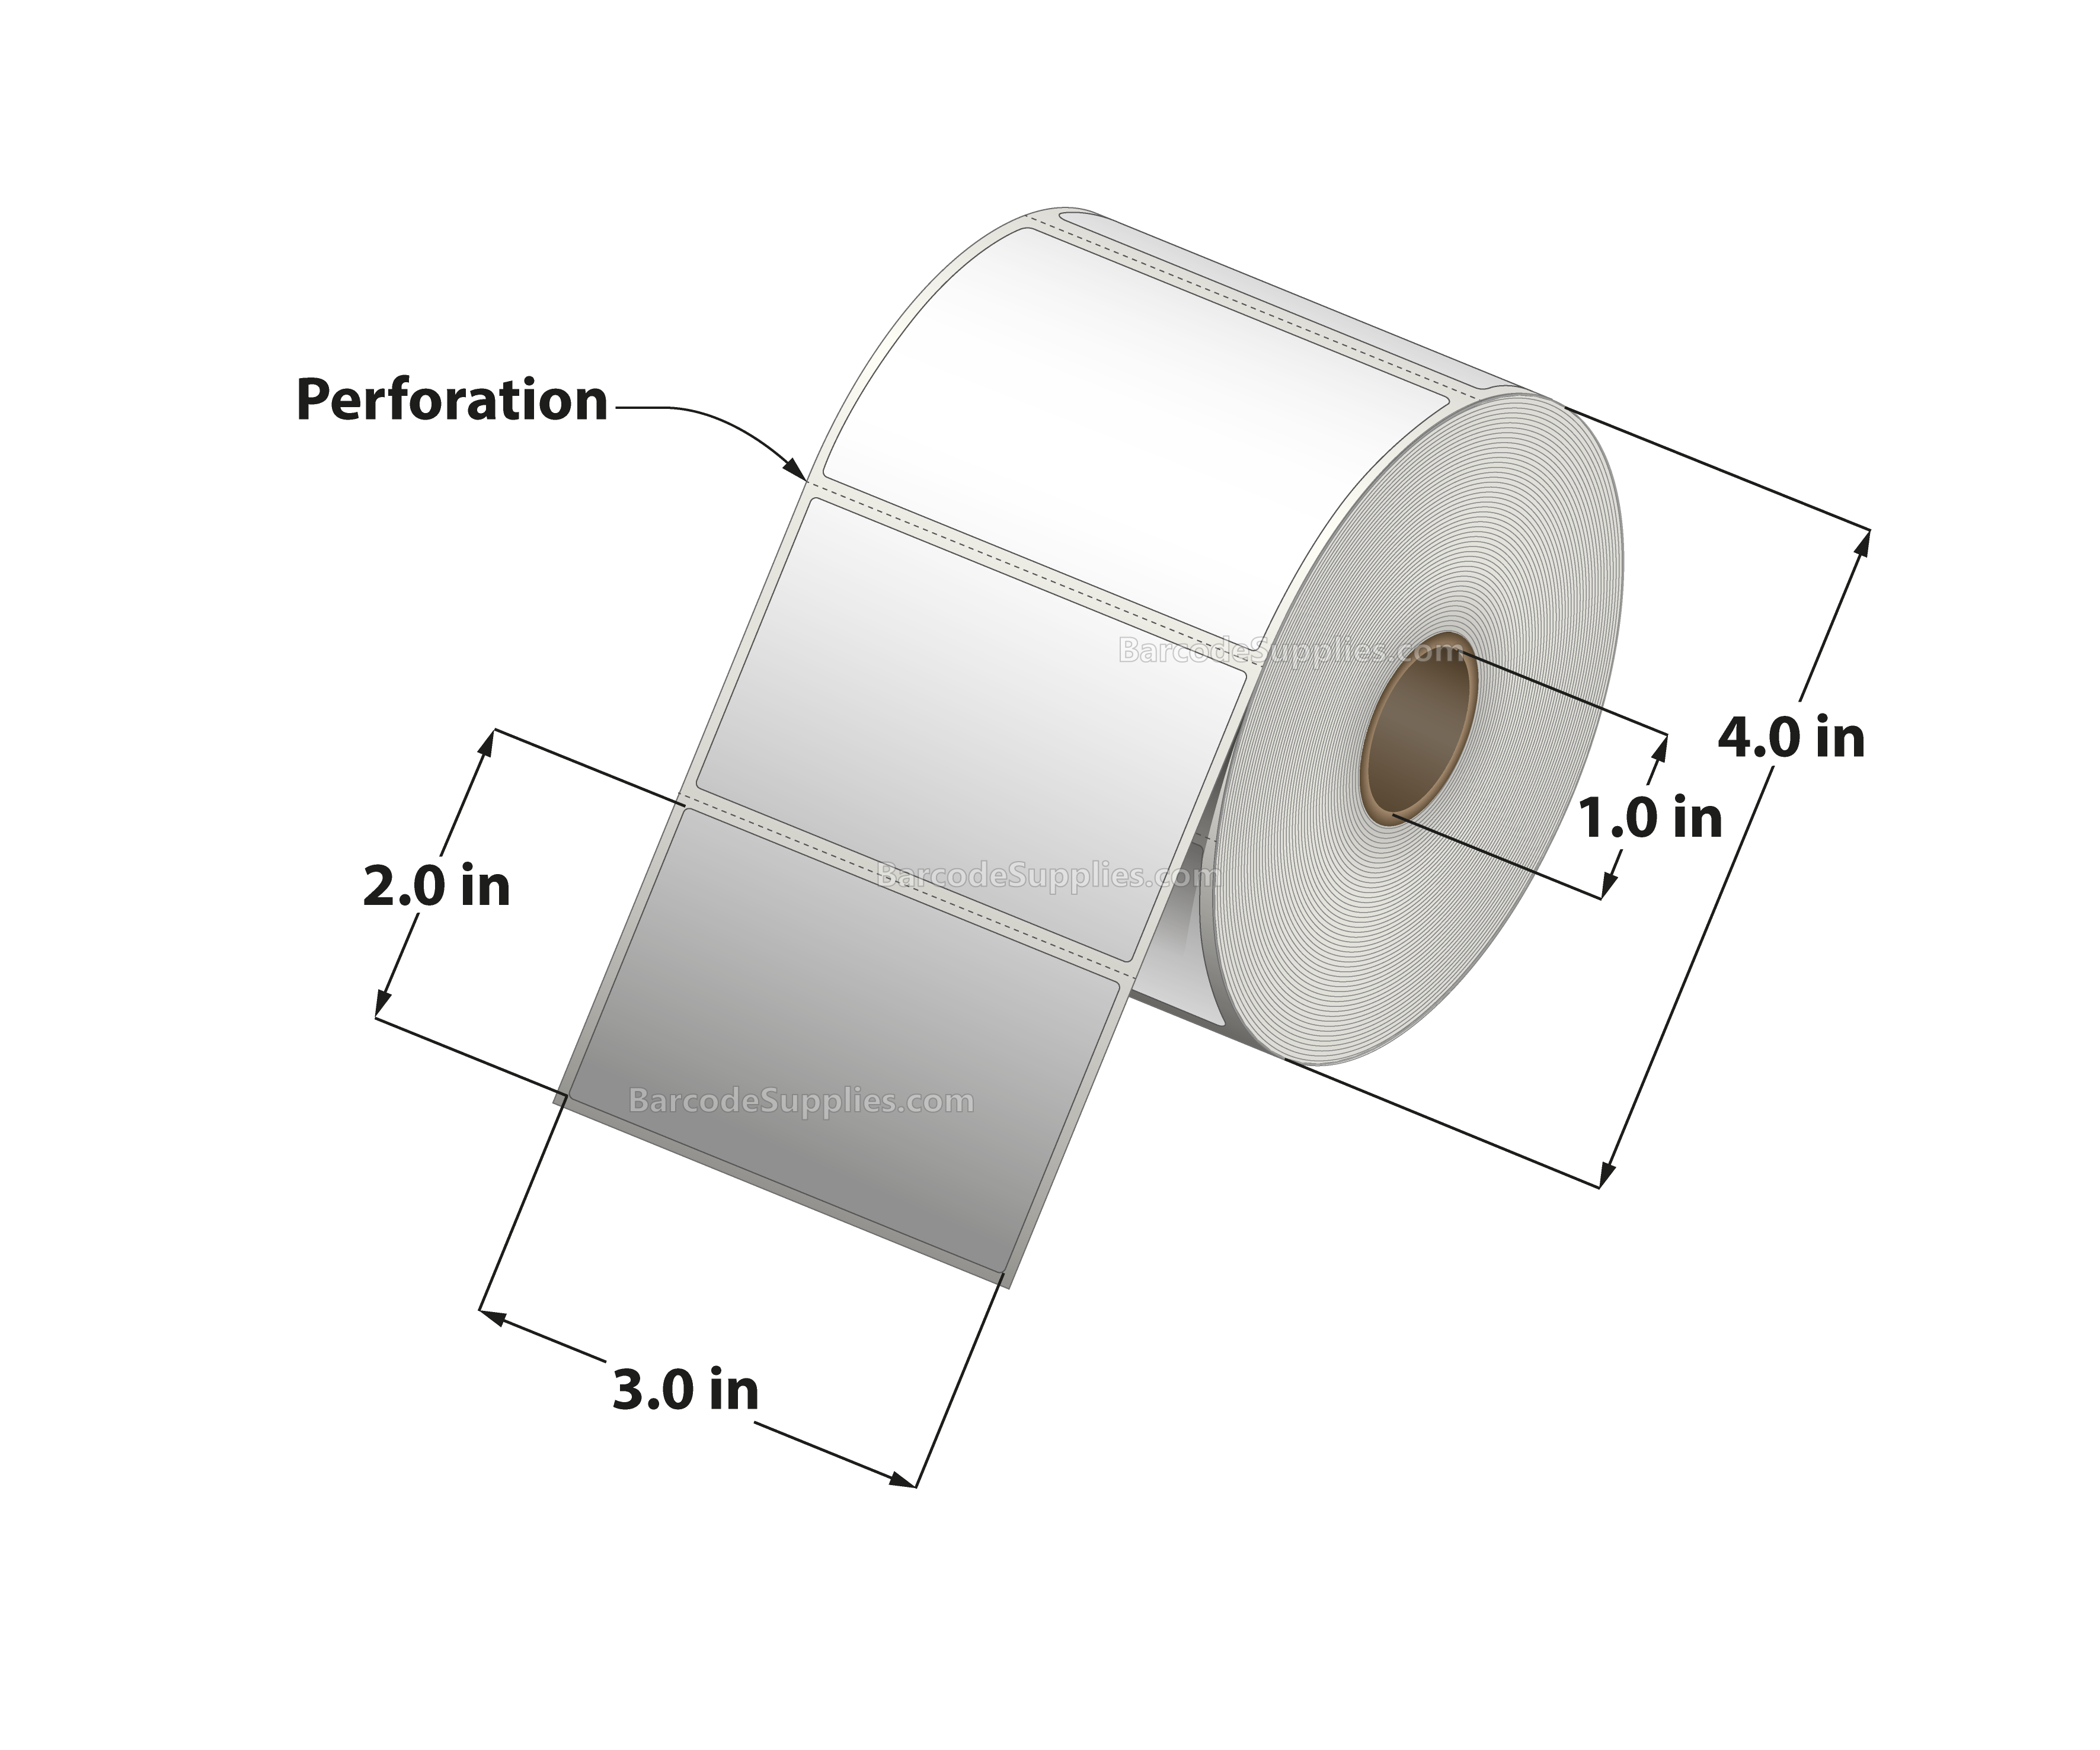 3 x 2 Direct Thermal White Labels With Acrylic Adhesive - Perforated - 735 Labels Per Roll - Carton Of 12 Rolls - 8820 Labels Total - MPN: RD-3-2-735-1 - BarcodeSource, Inc.